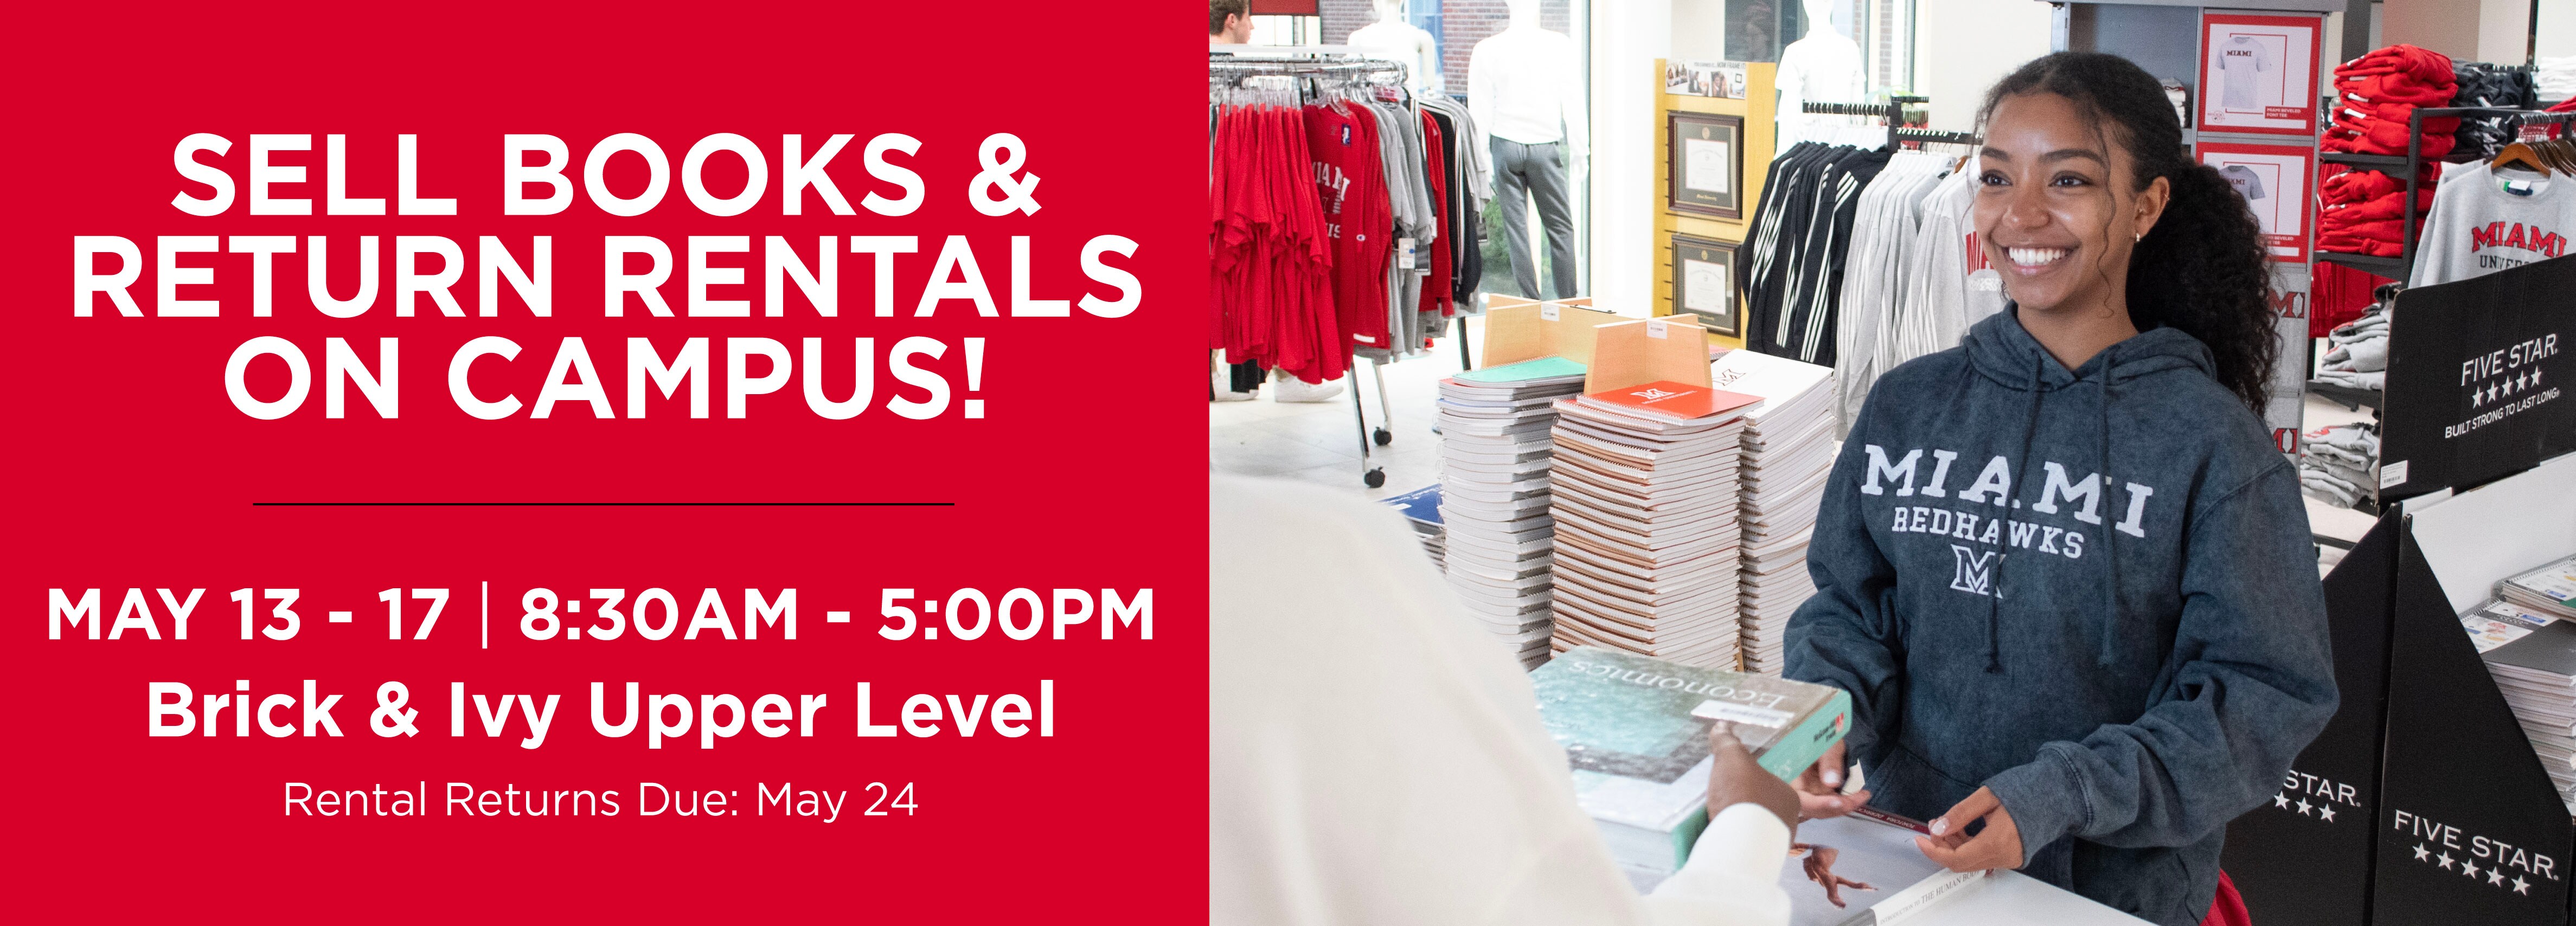 Sell Books & Return Rentals on Campus! May 13 - 17 8:30AM- 5PM Brick & Ivy Upper Level Rental Return Due May 24